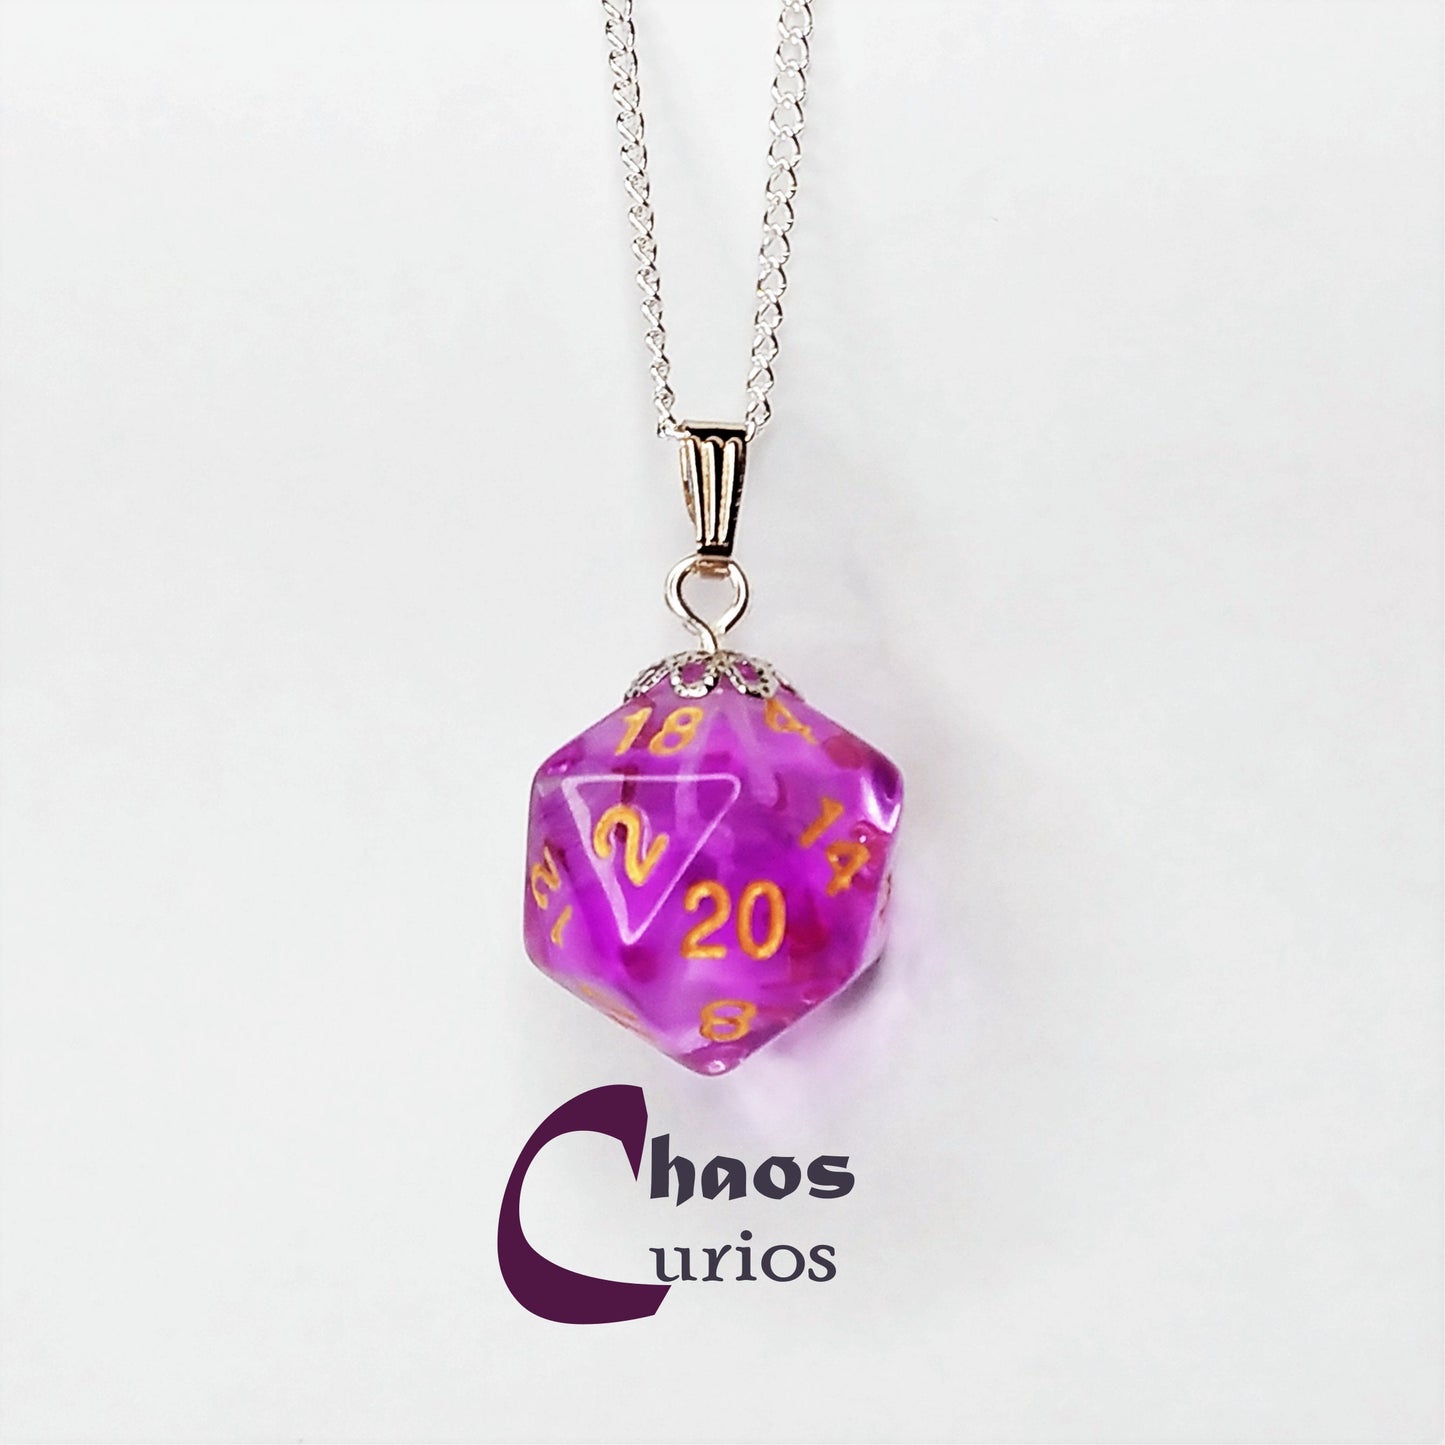 D20 Necklace, Silver Finishing, Roll for Initiative